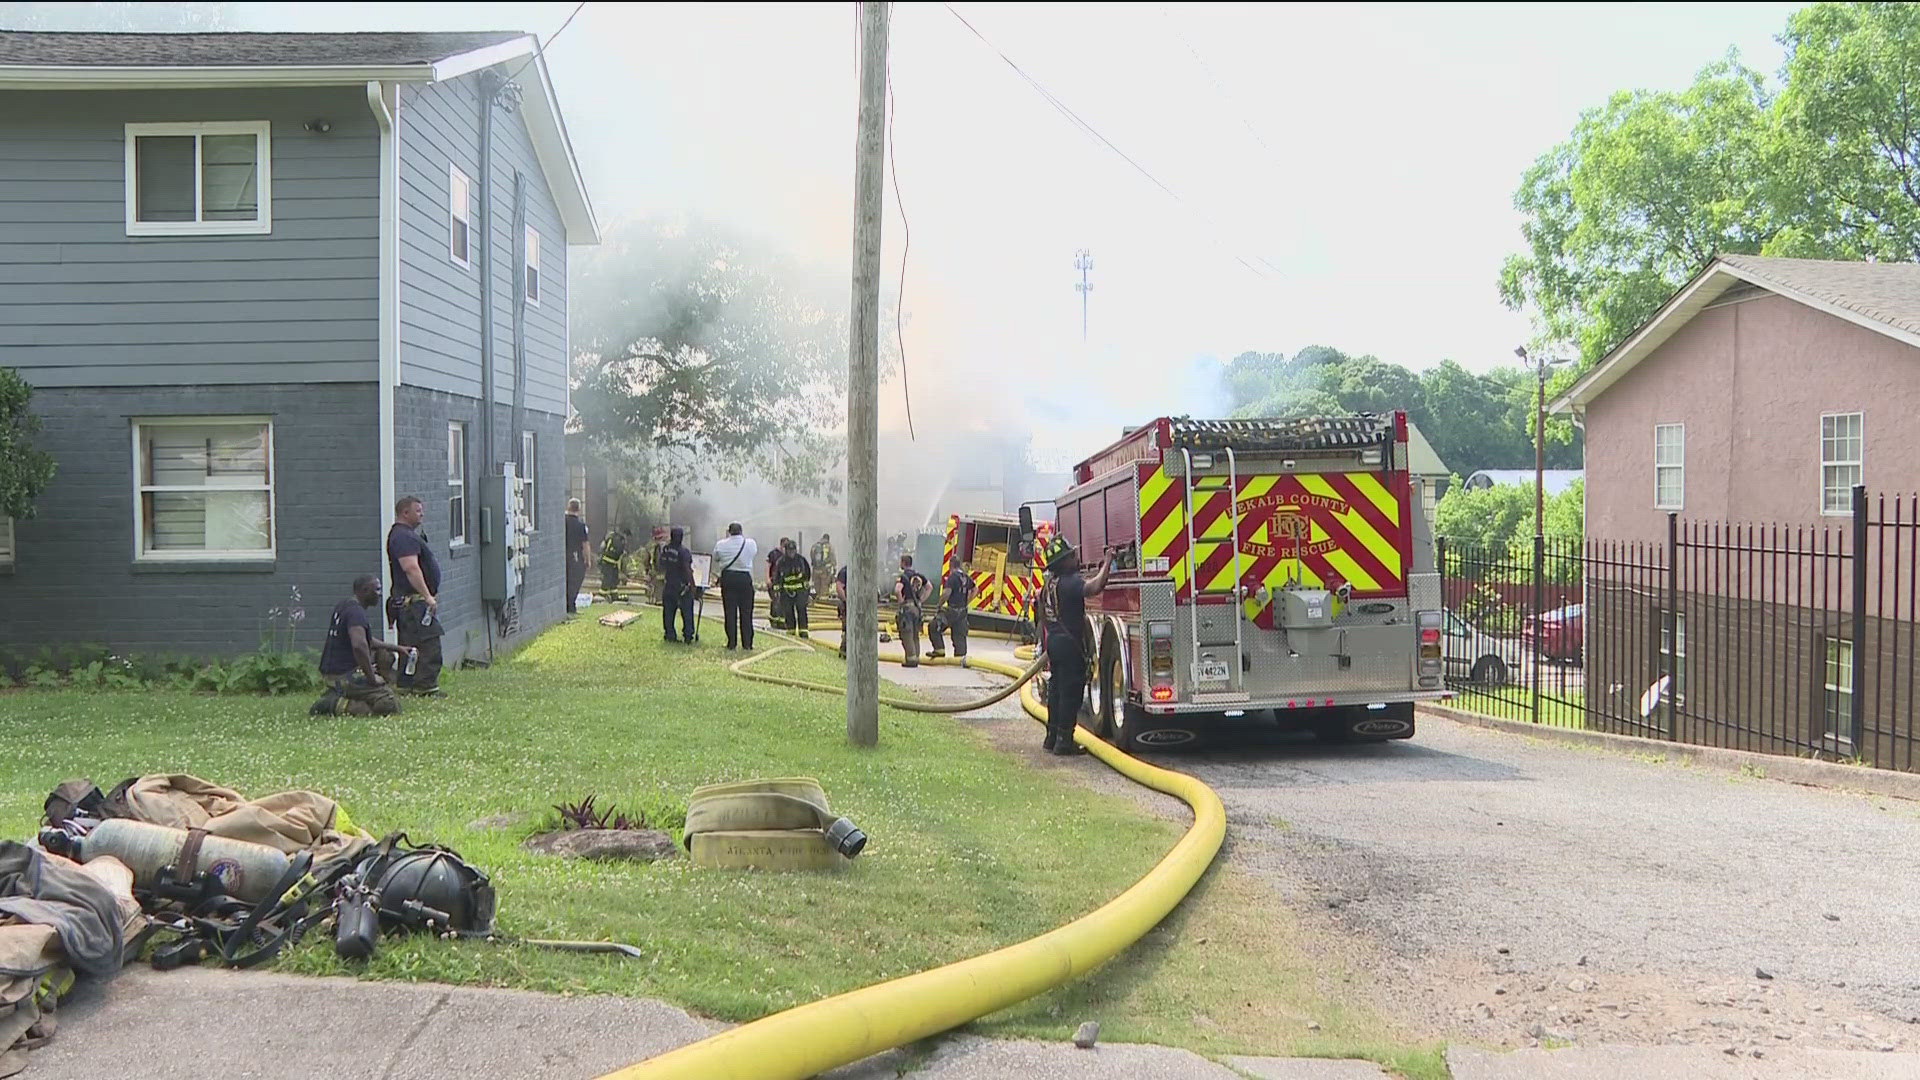 In one case, firefighters faced challenges with water supply in extinguishing an abandoned house fire. And the city continues making progress in restoration.